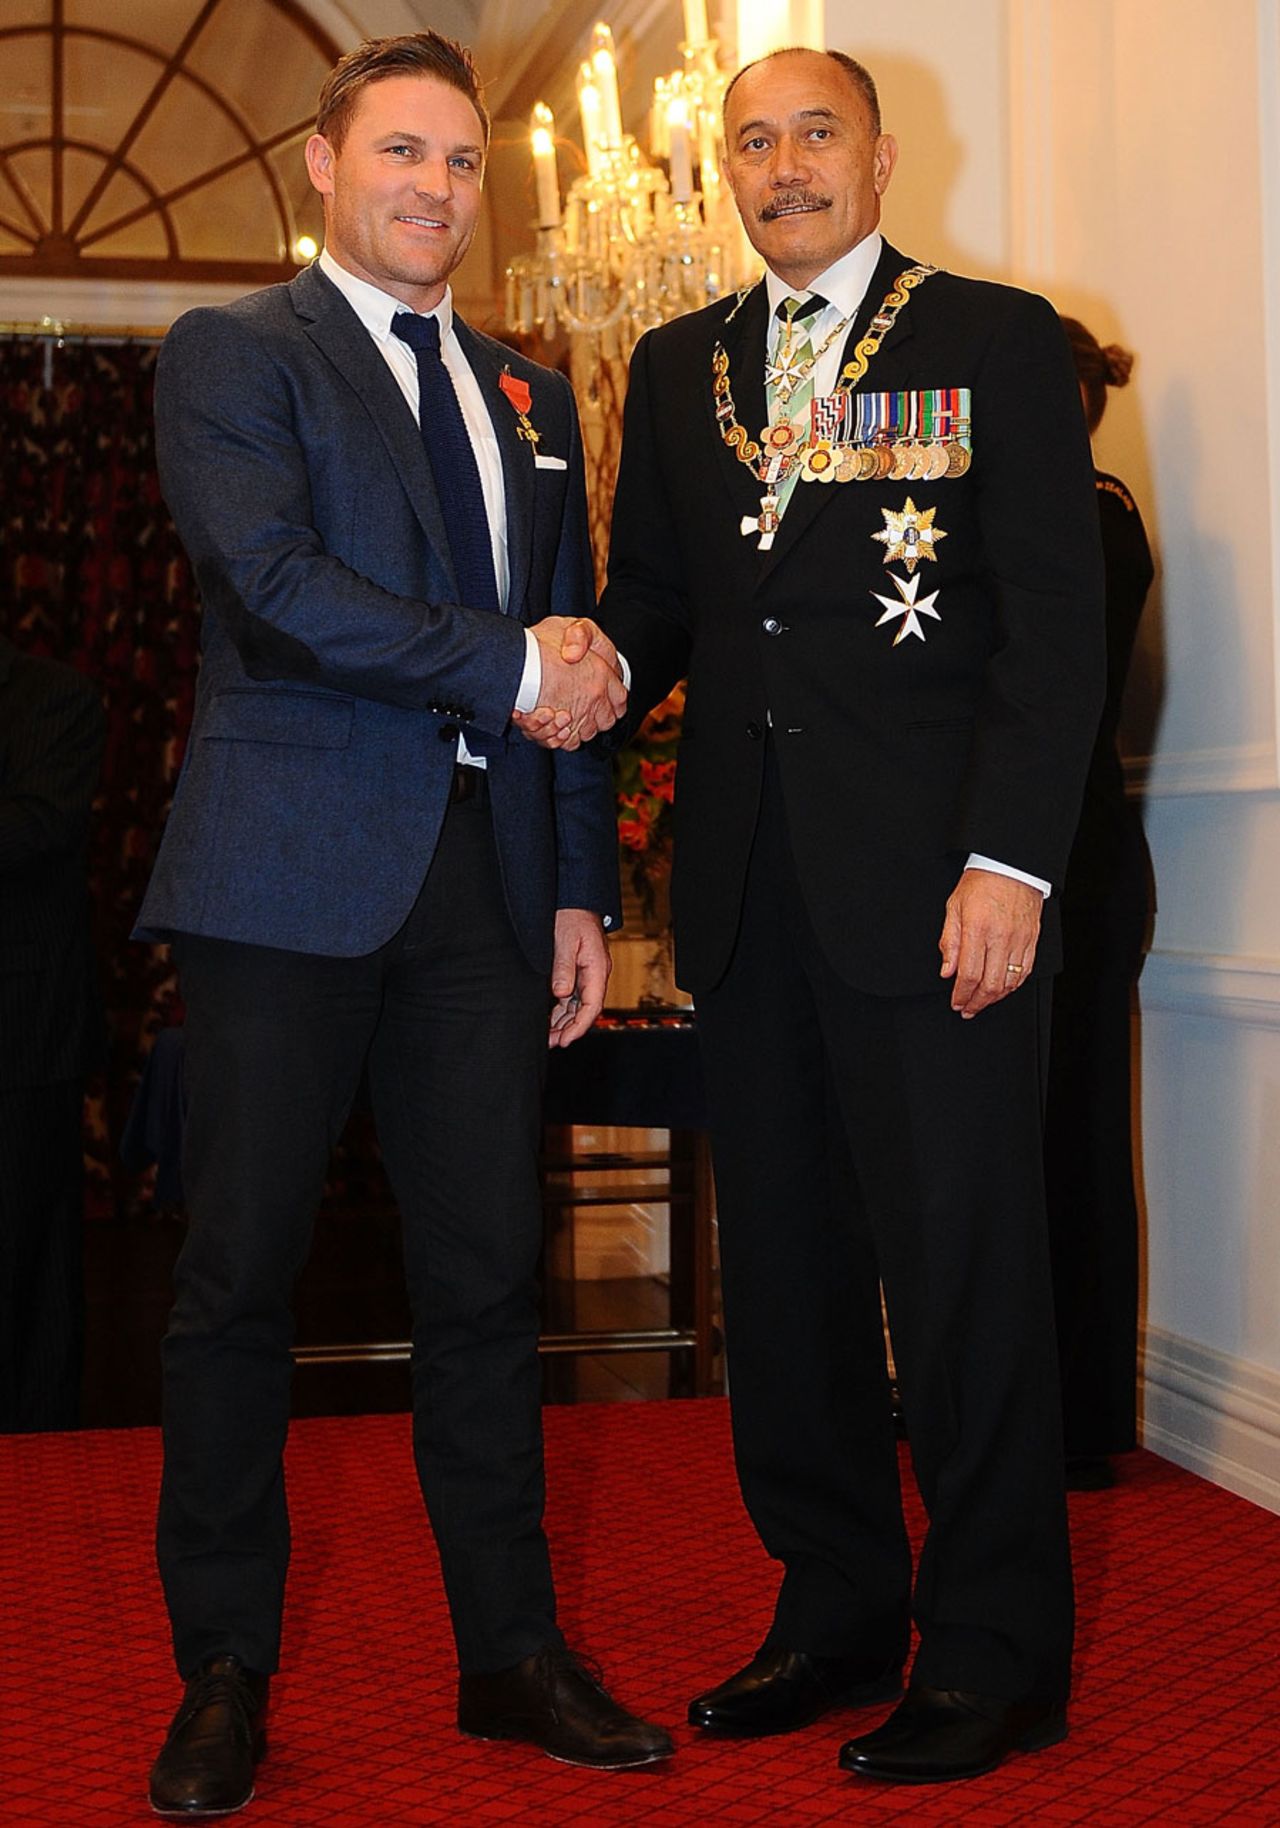 Brendon McCullum was given an ONZM for services to cricket, Wellington, September 15, 2015